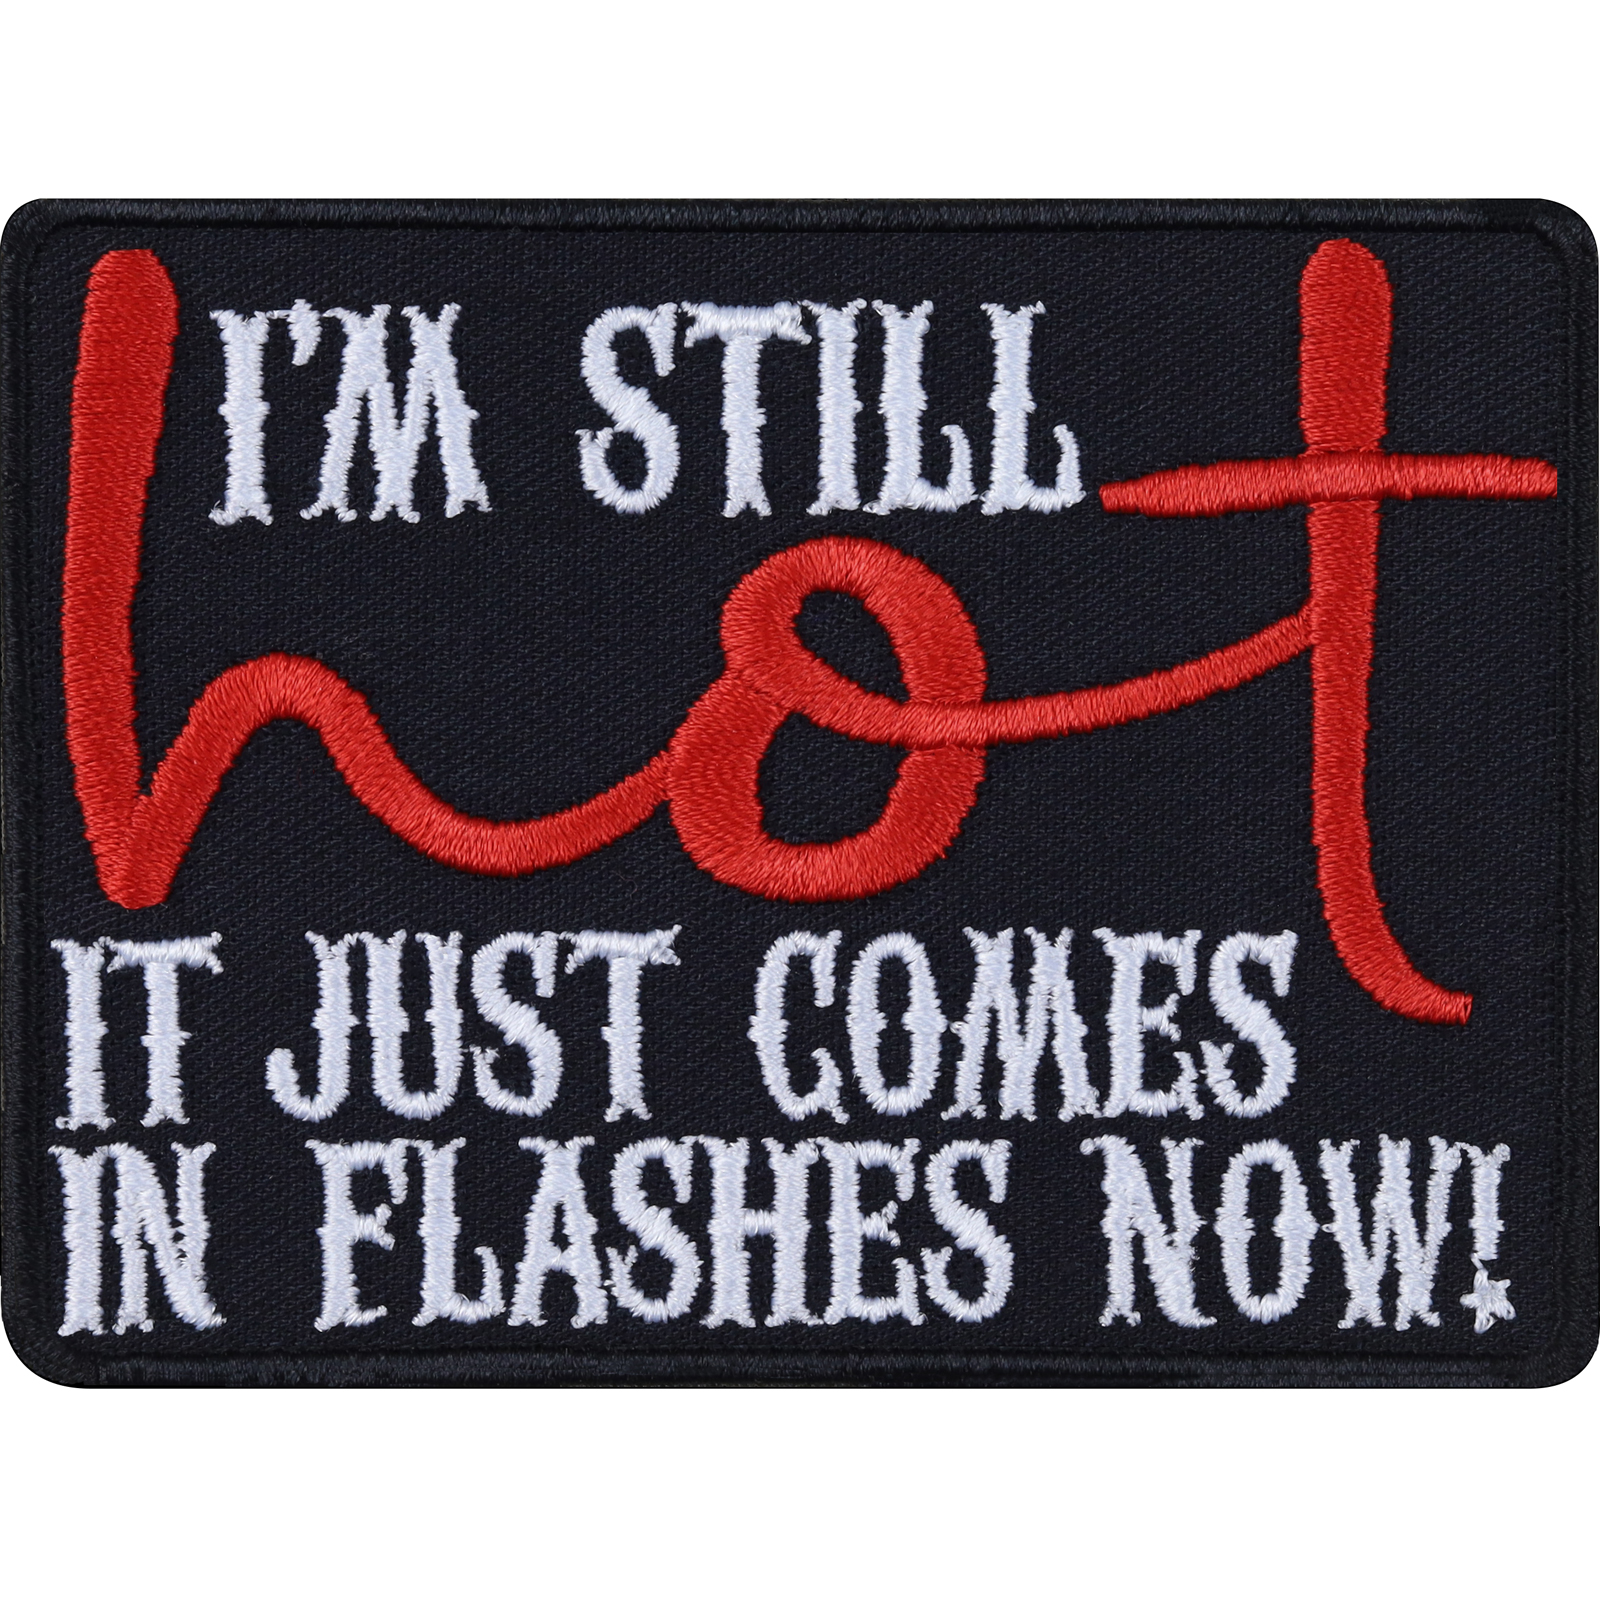 I'm still hot (It just comes in flashes now!) - Patch